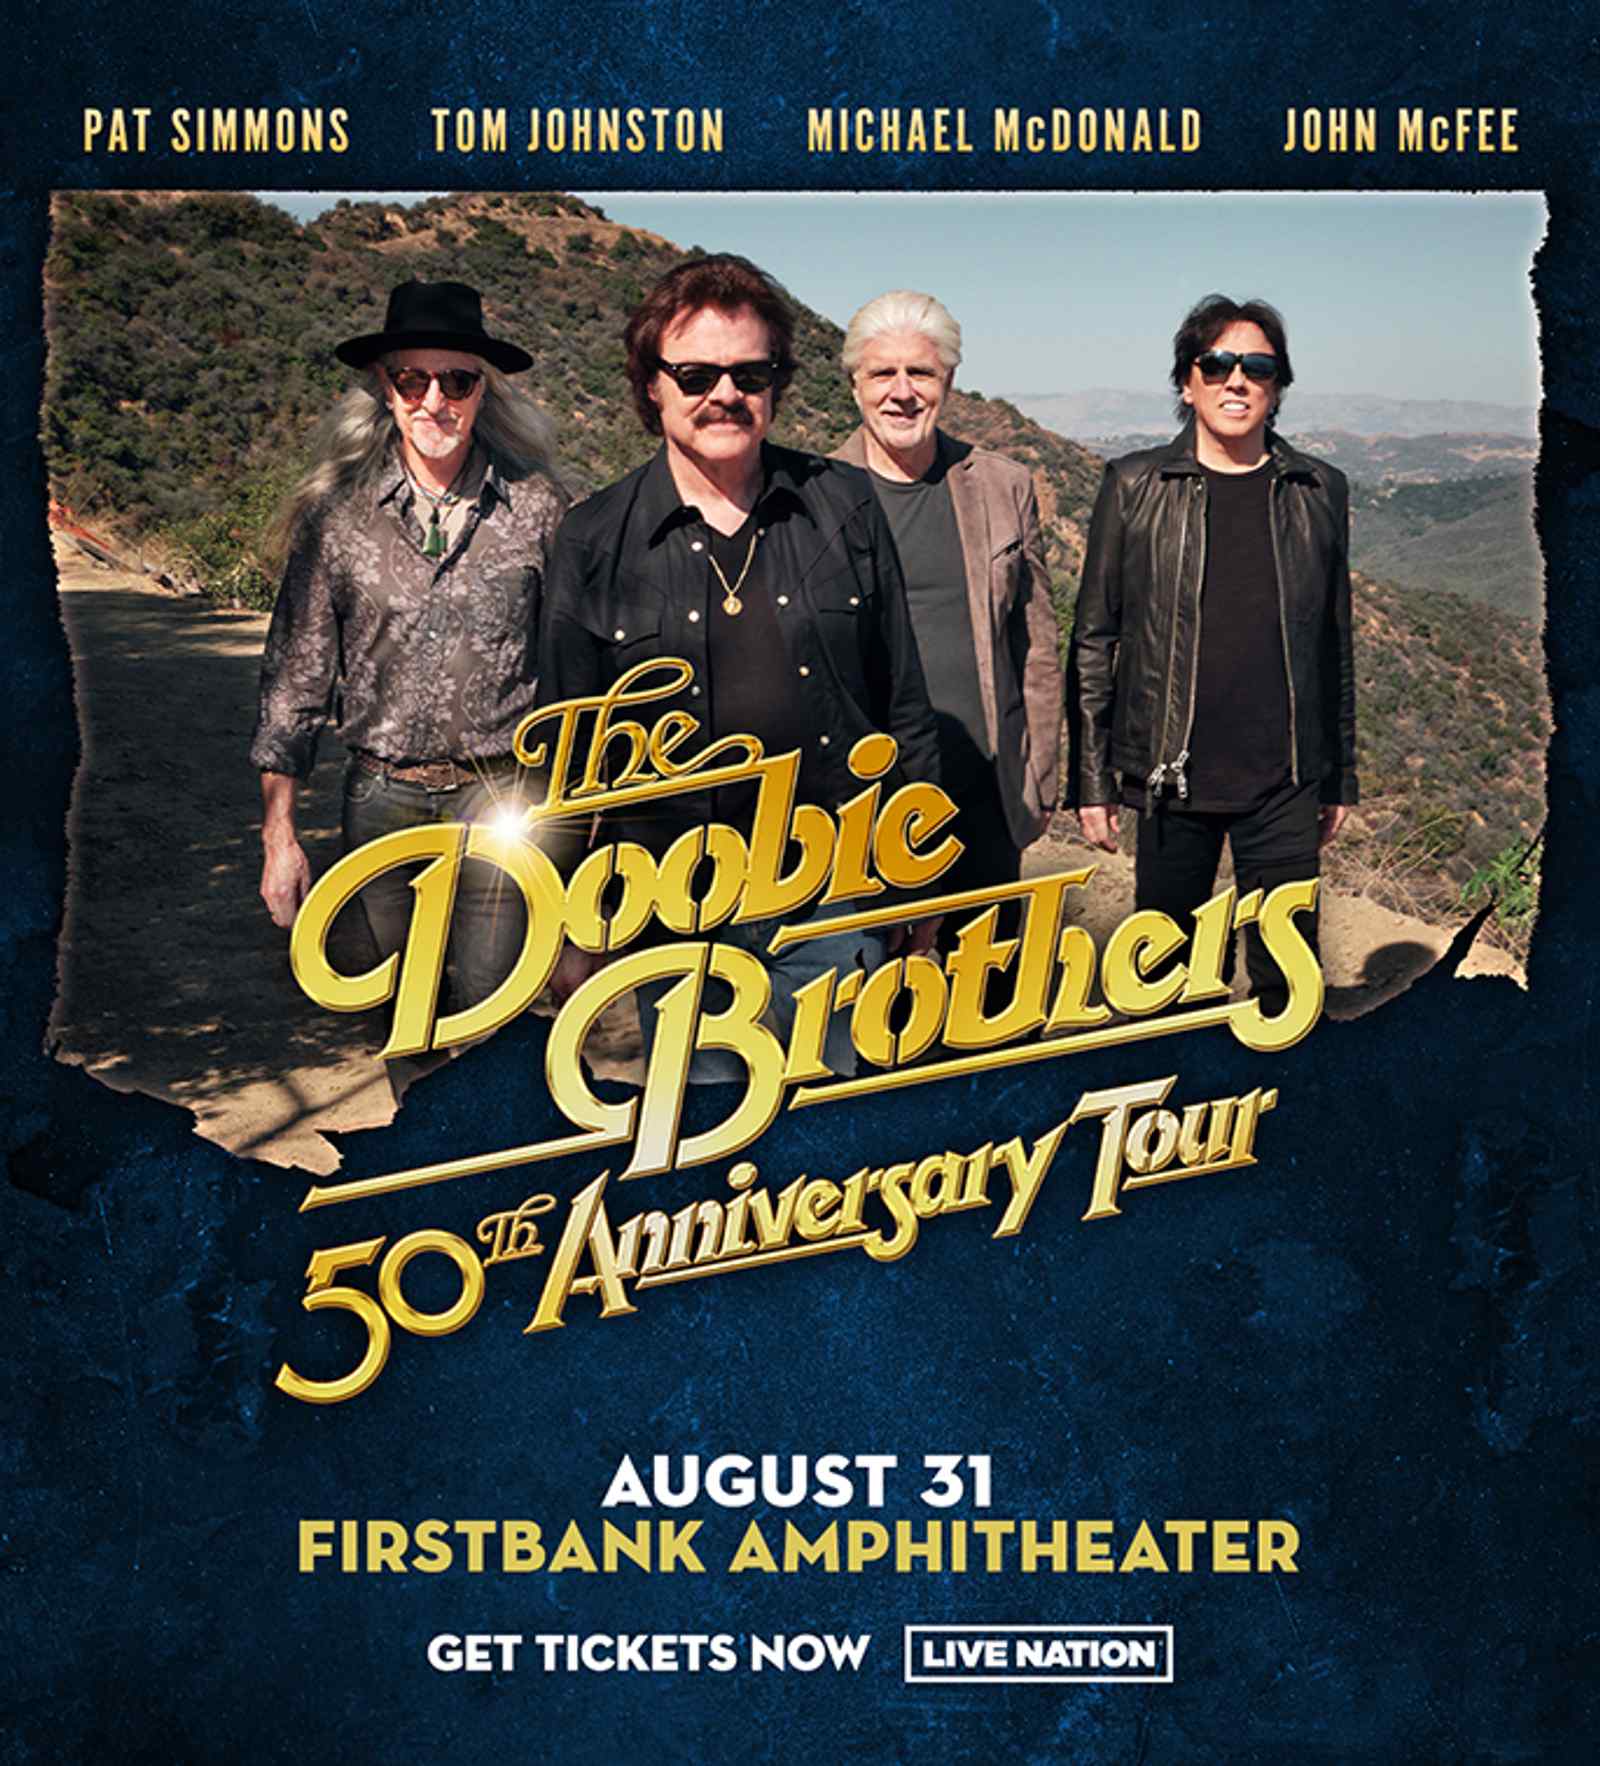 The Doobie Brothers 50th Anniversary Tour, will have a Franklin, TN show on August 31 at FirstBank Amphitheater.